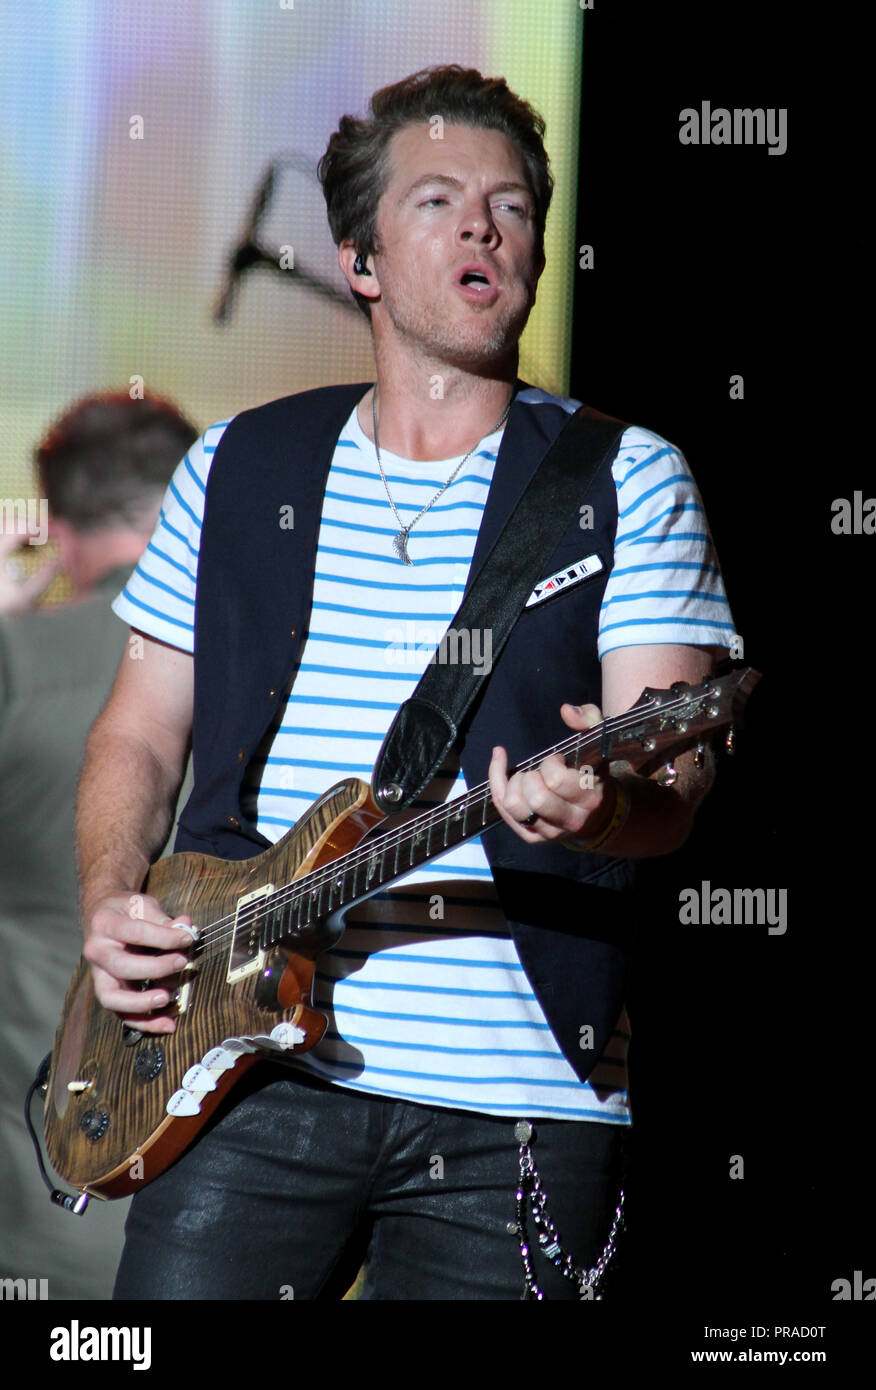 Joe Don Rooney with Rascal Flatts performs in concert at the Cruzan Amphitheatre in West Palm Beach, Florida on September 13, 2014 Stock Photo